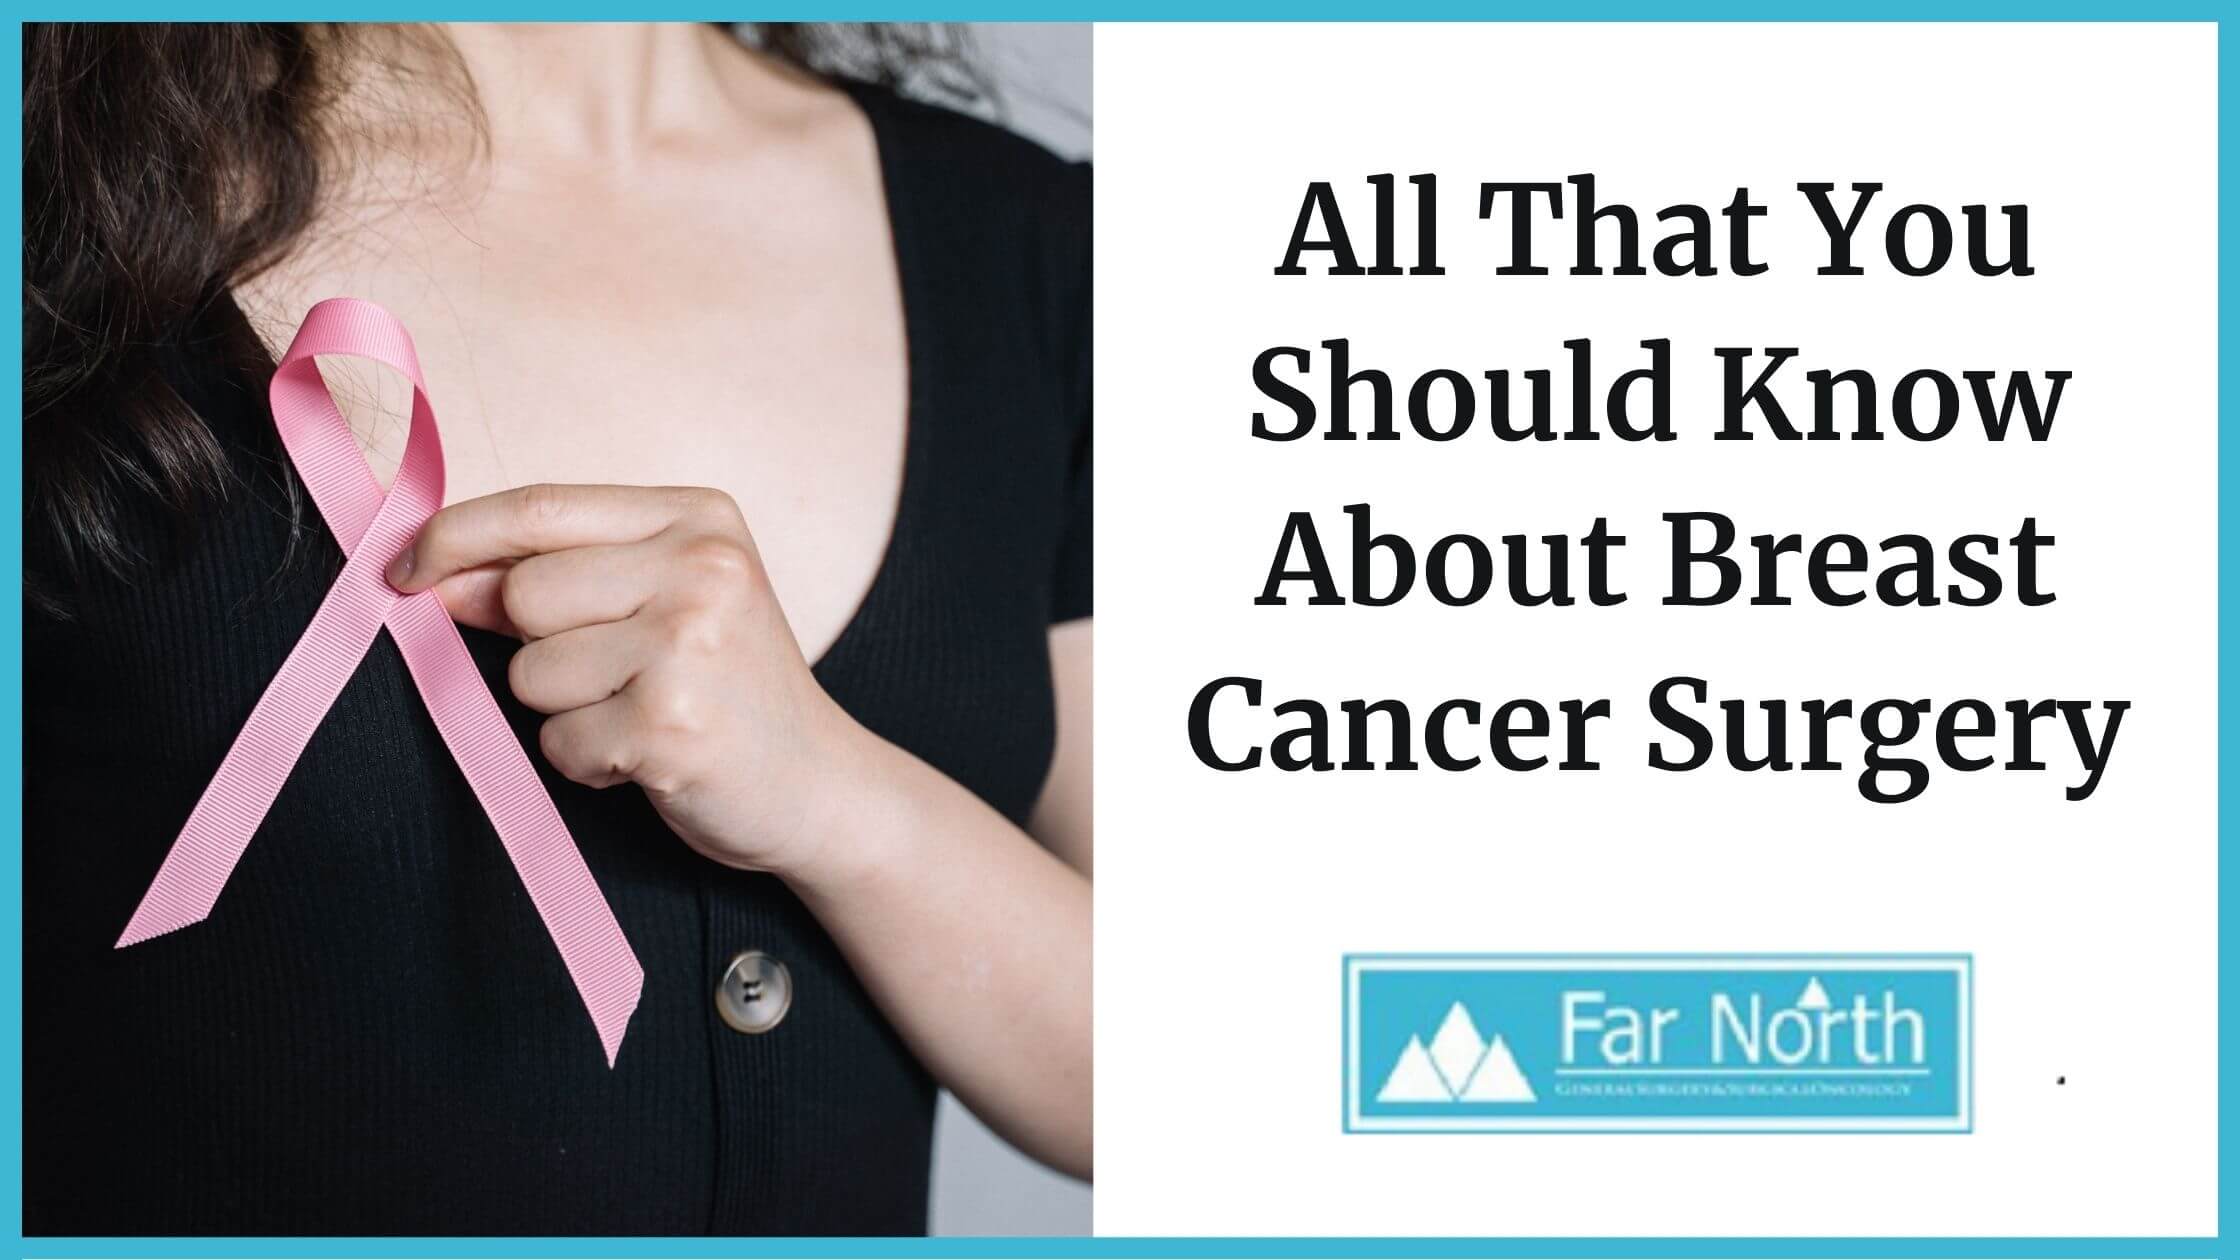 All That You Should Know About Breast Cancer Surgery